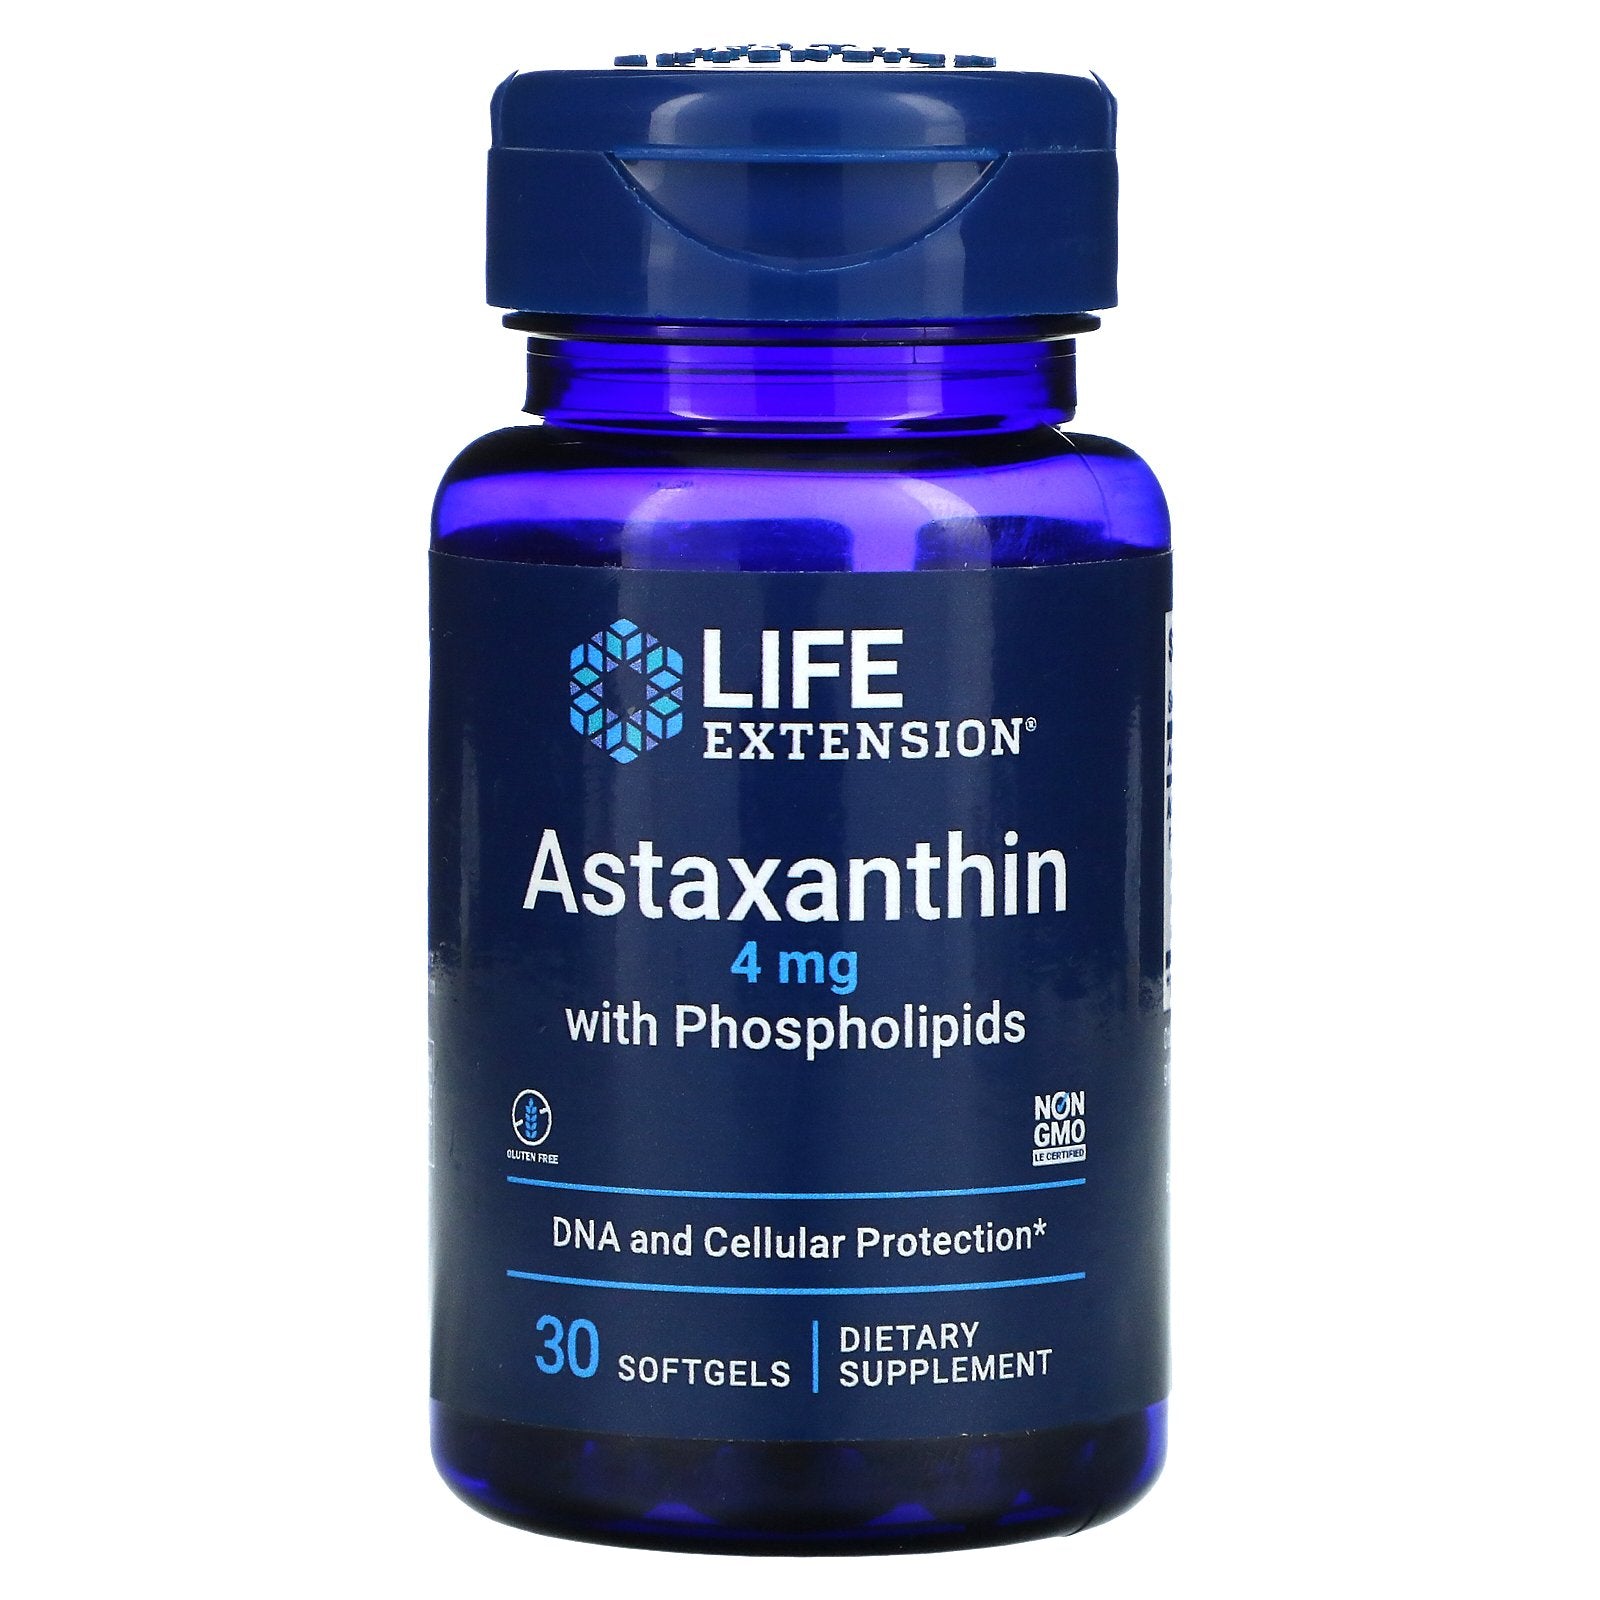 Life Extension, Astaxanthin with Phospholipids, 4 mg Softgels